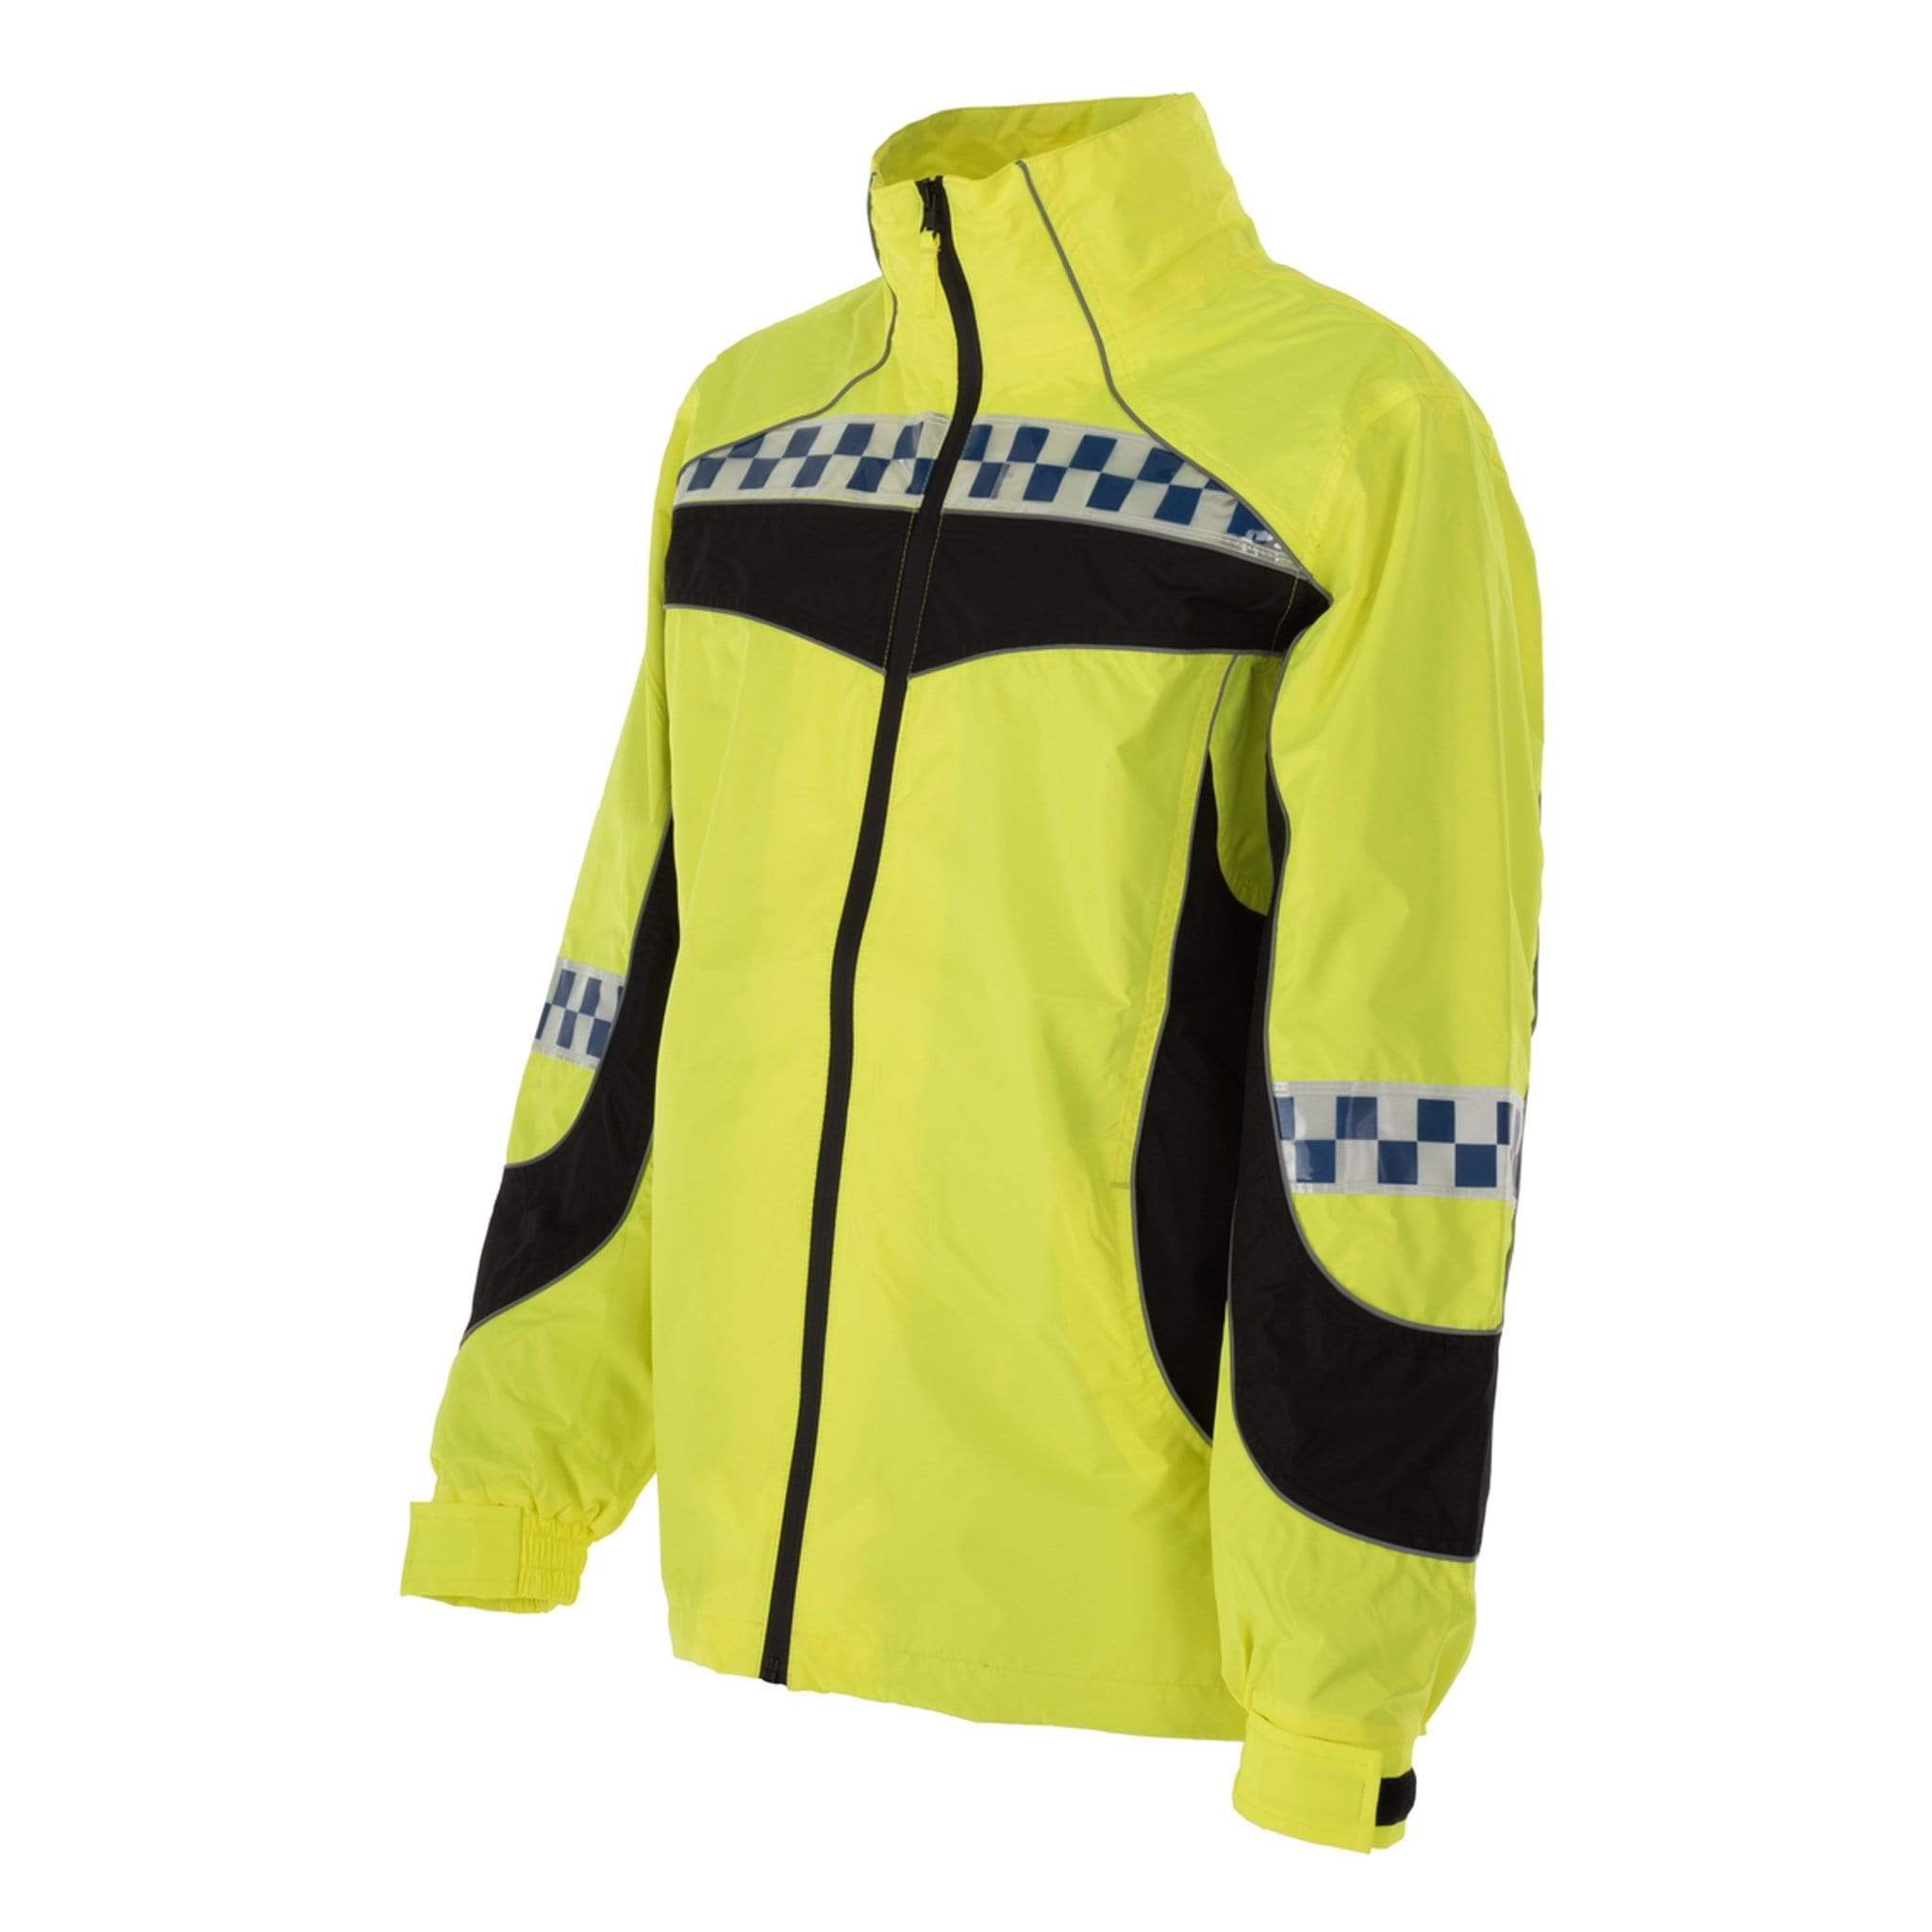 Equisafety Polite Lightweight Jacket Yellow Front View POLLWJO1